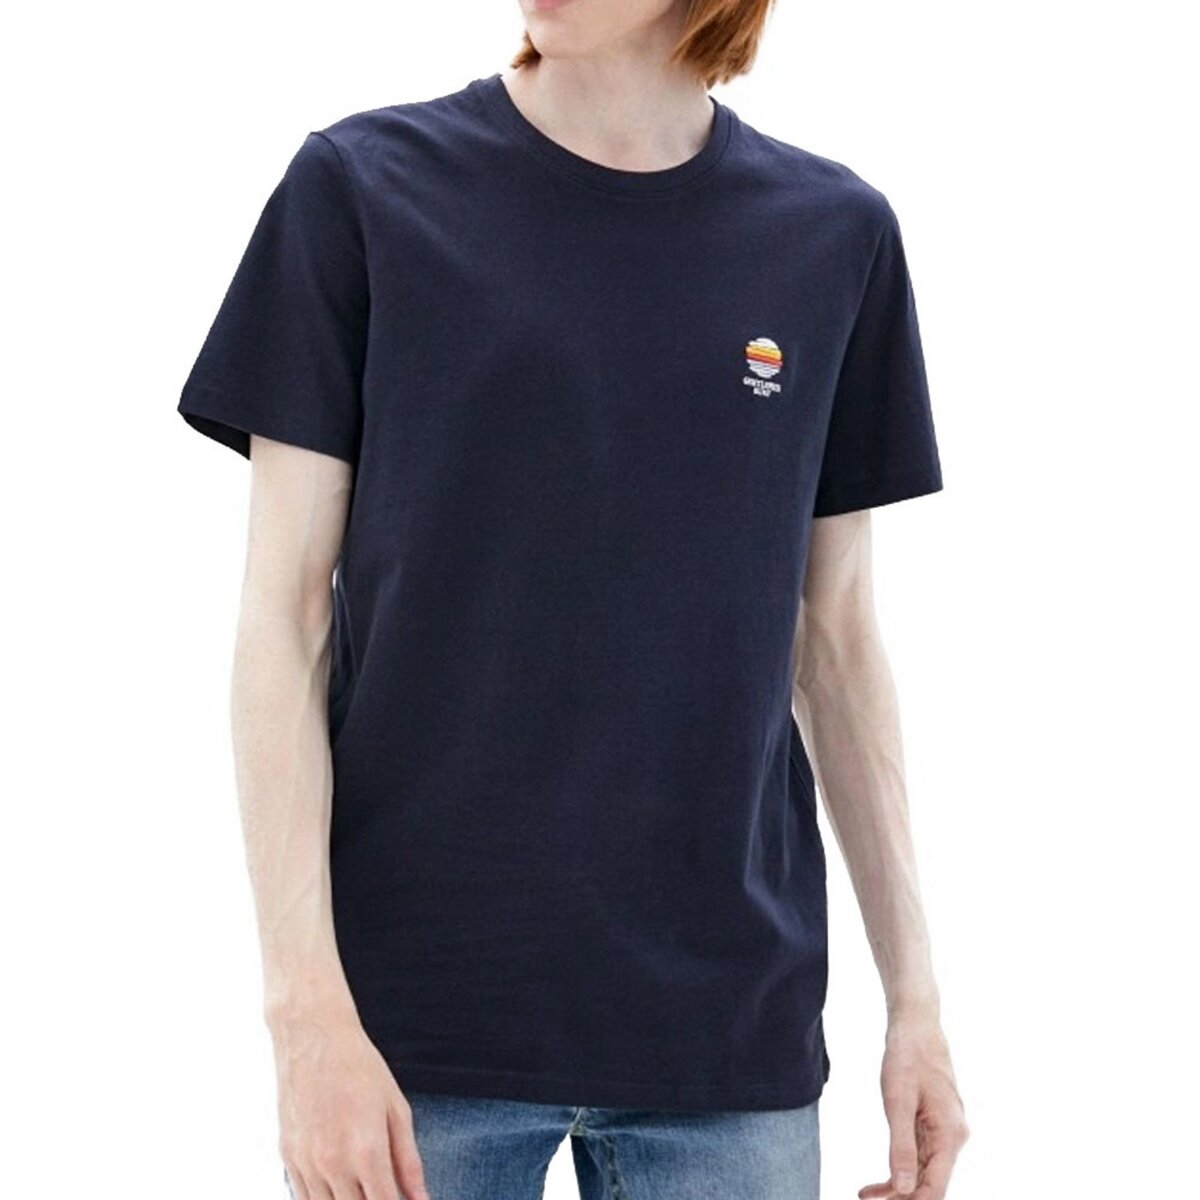  T-shirt Marine Homme Selected Fate